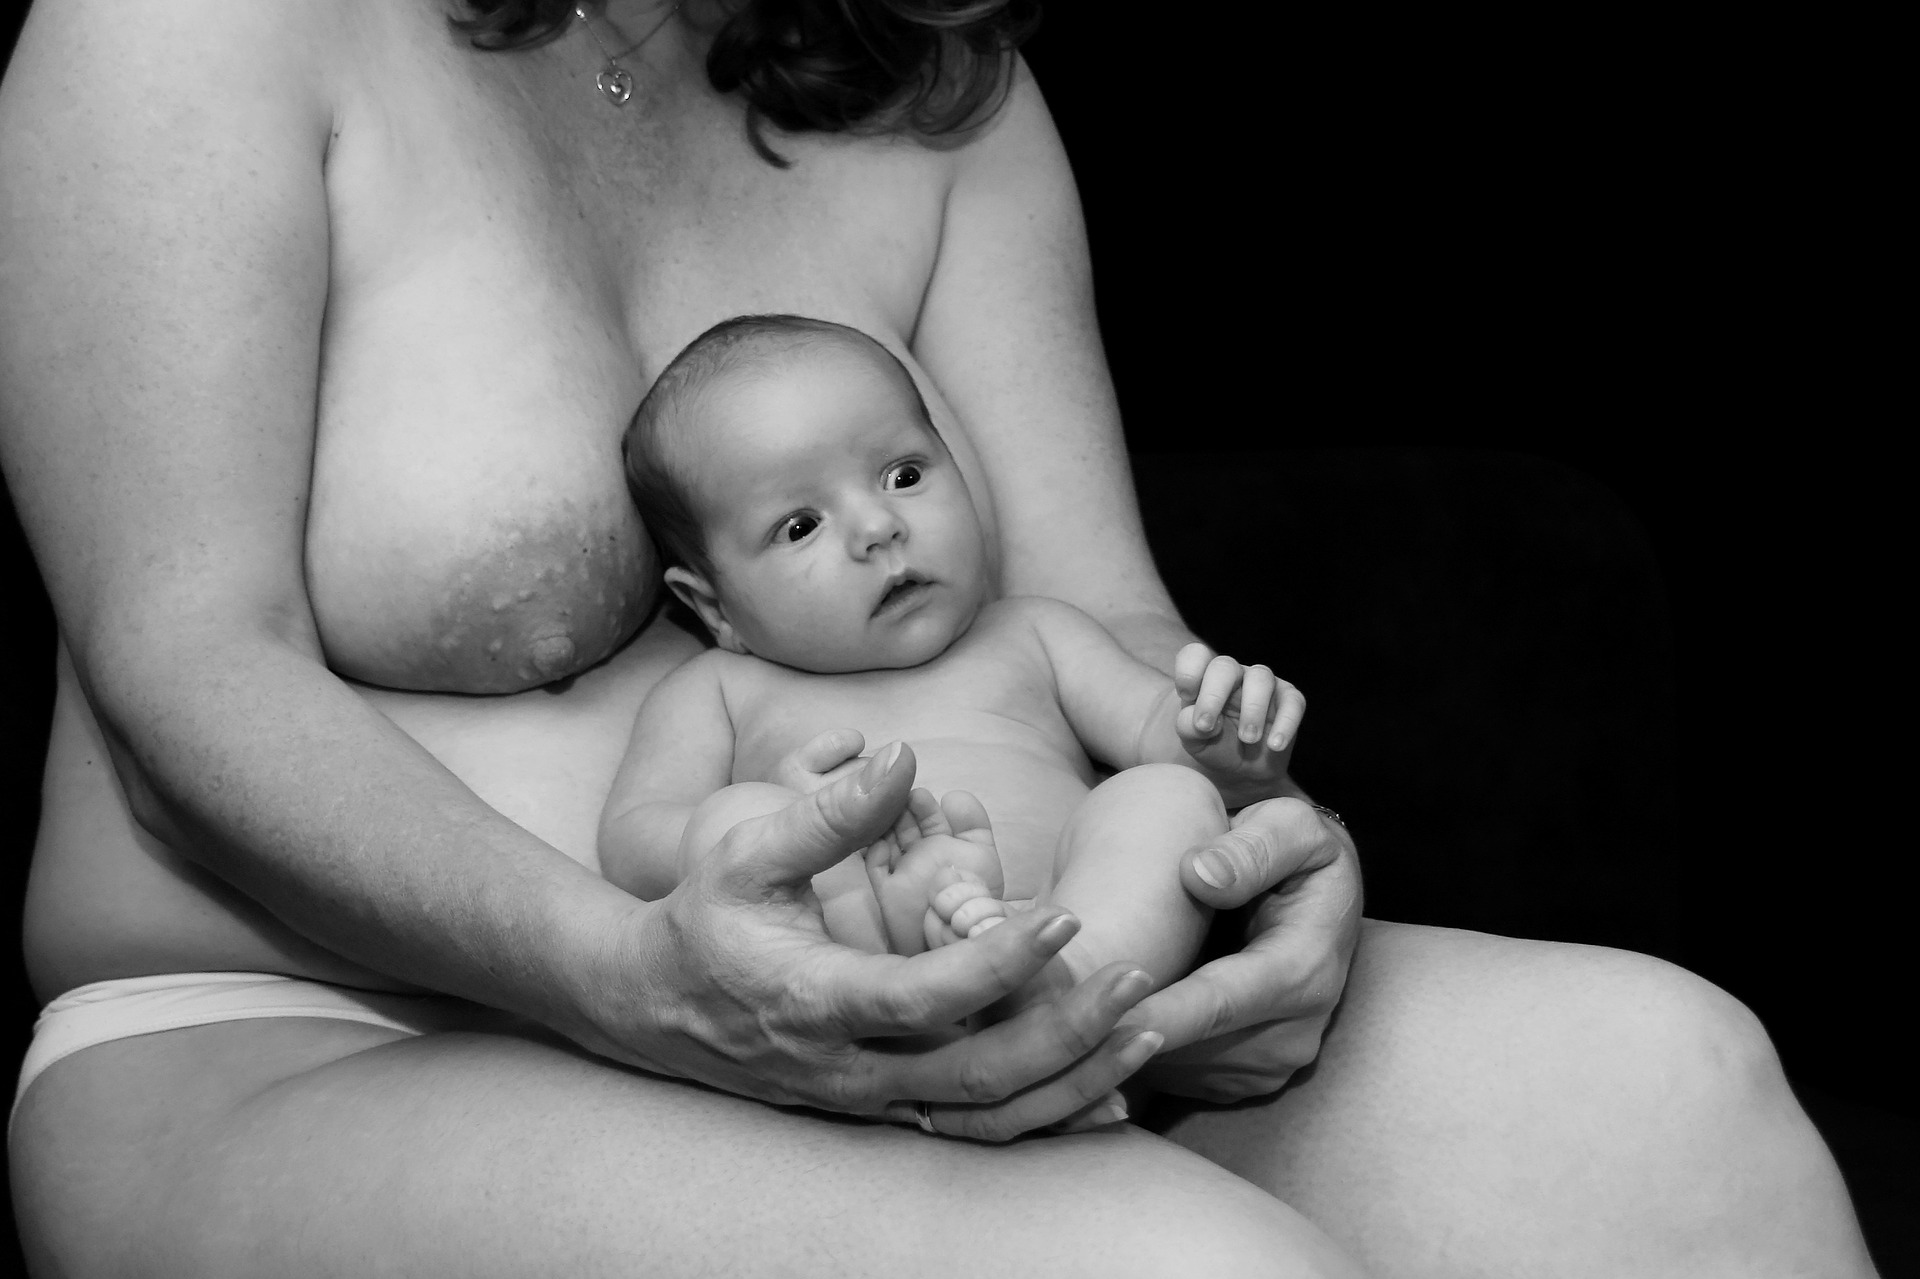 Surprised, even shocked, baby; or perhaps reflective; baby is seated and held warmly on the hips of the nude mother; baby's head rests between her breasts; mother's face not visible; B&W photo